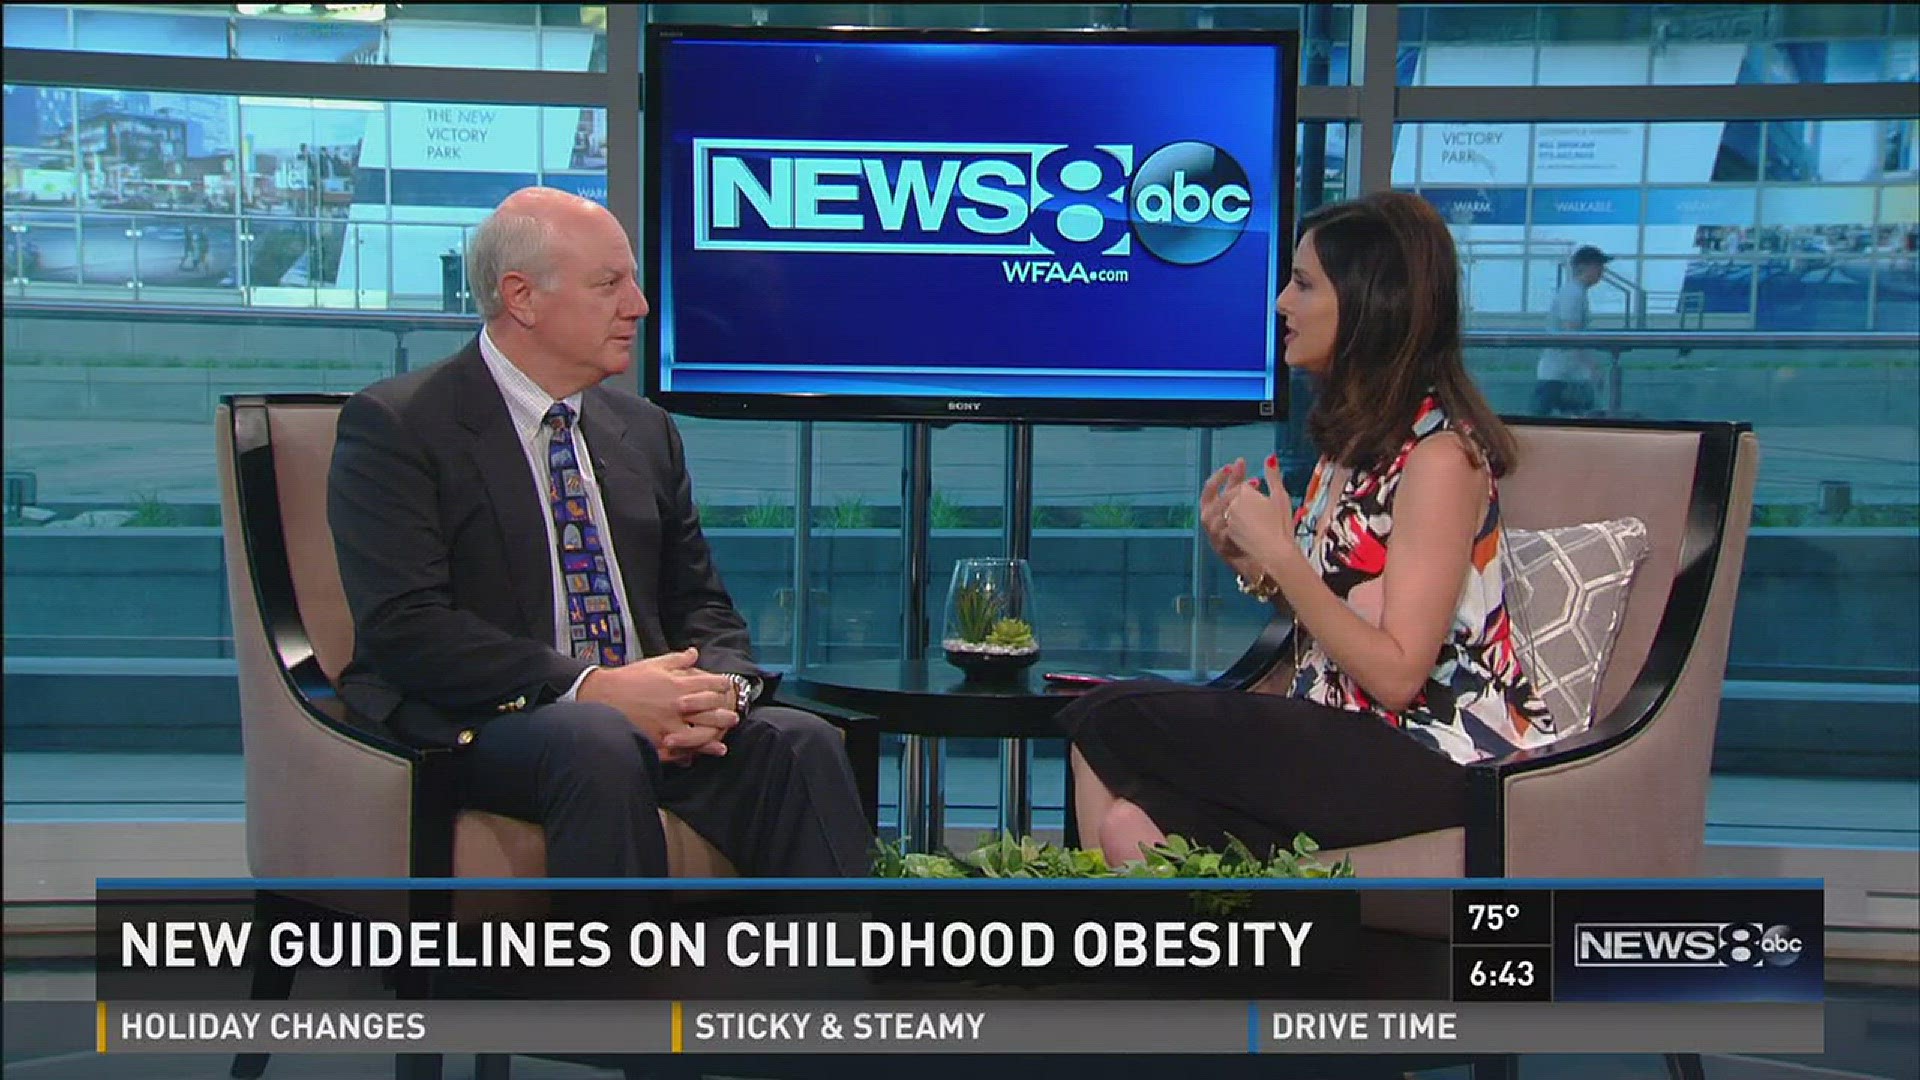 Dr. Albert G. Karam of Medical City Hospital talks about new guidelines from the nation’s top pediatric group suggesting childhood obesity can be prevented even before the age of two.